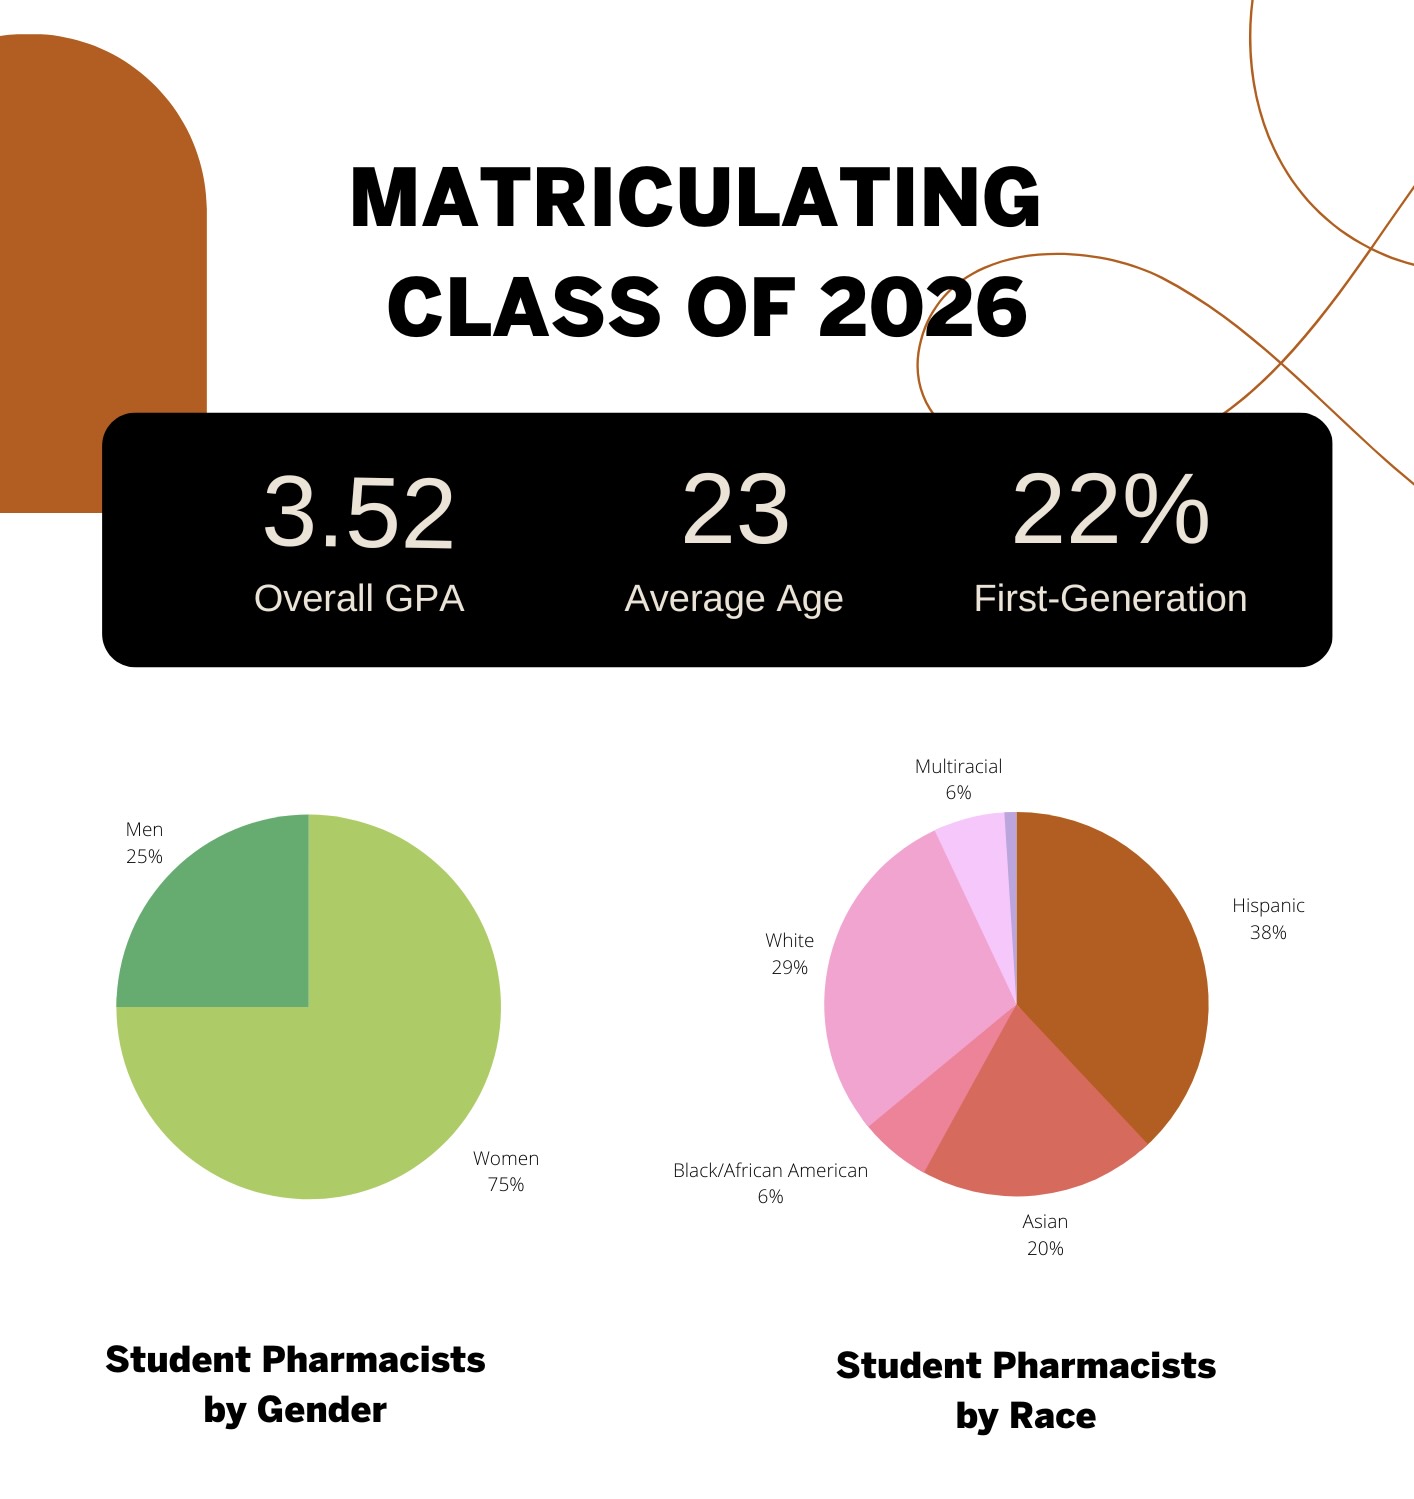 Demographics of Class of 2026 infographic (3.52 overall GPA, 23 average age, 22% first generation, 25% men, 75% women, 38% Hispanic, 20% Asian, 6% Black/African American, 29% White, 6% Multiracial)